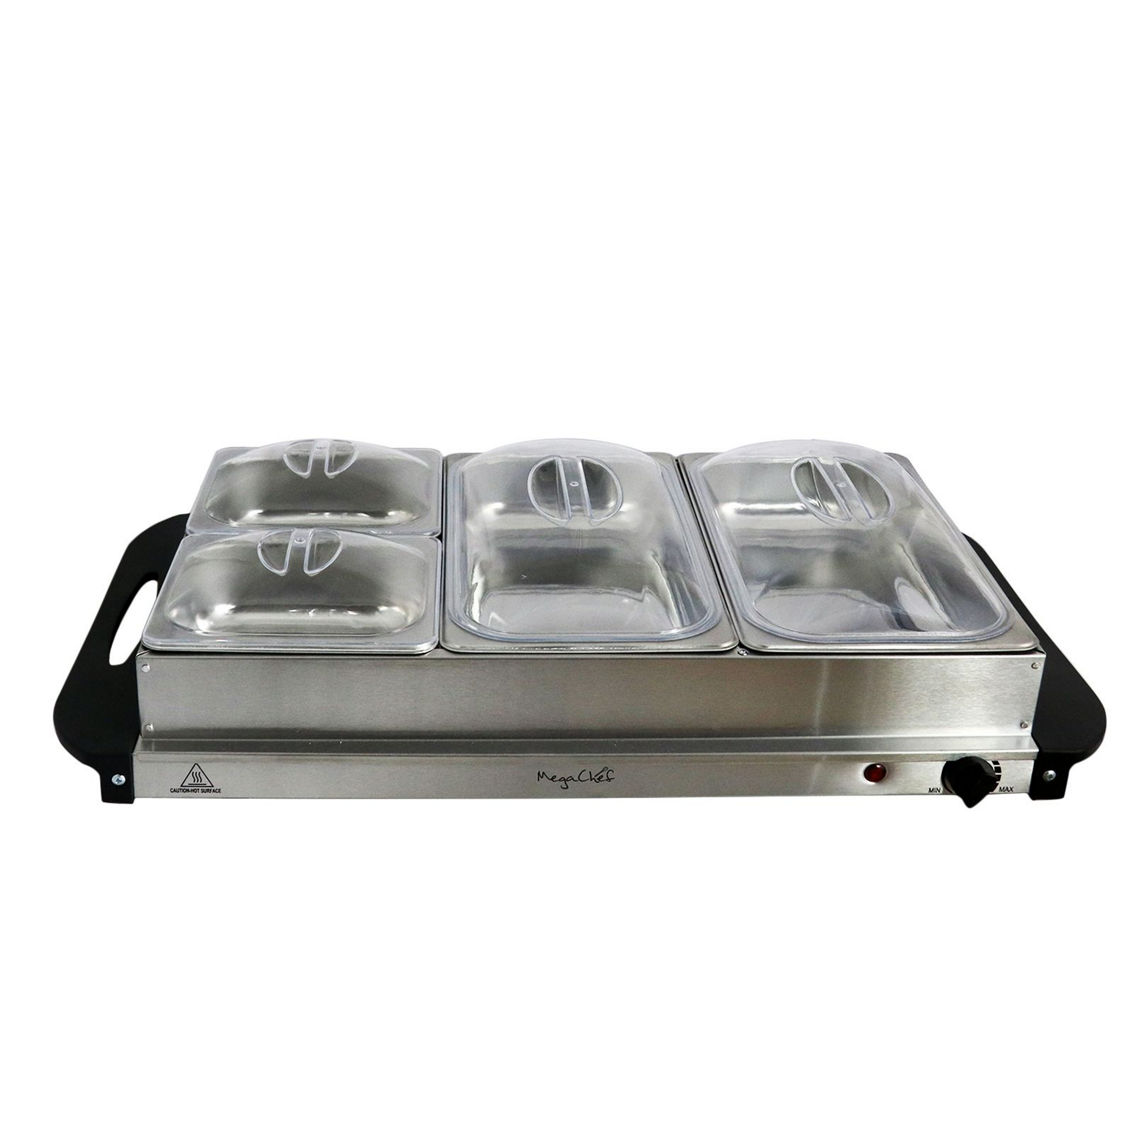 MegaChef Buffet Server & Food Warmer With 3 Removable Sectional Trays , Heated W - Image 5 of 5